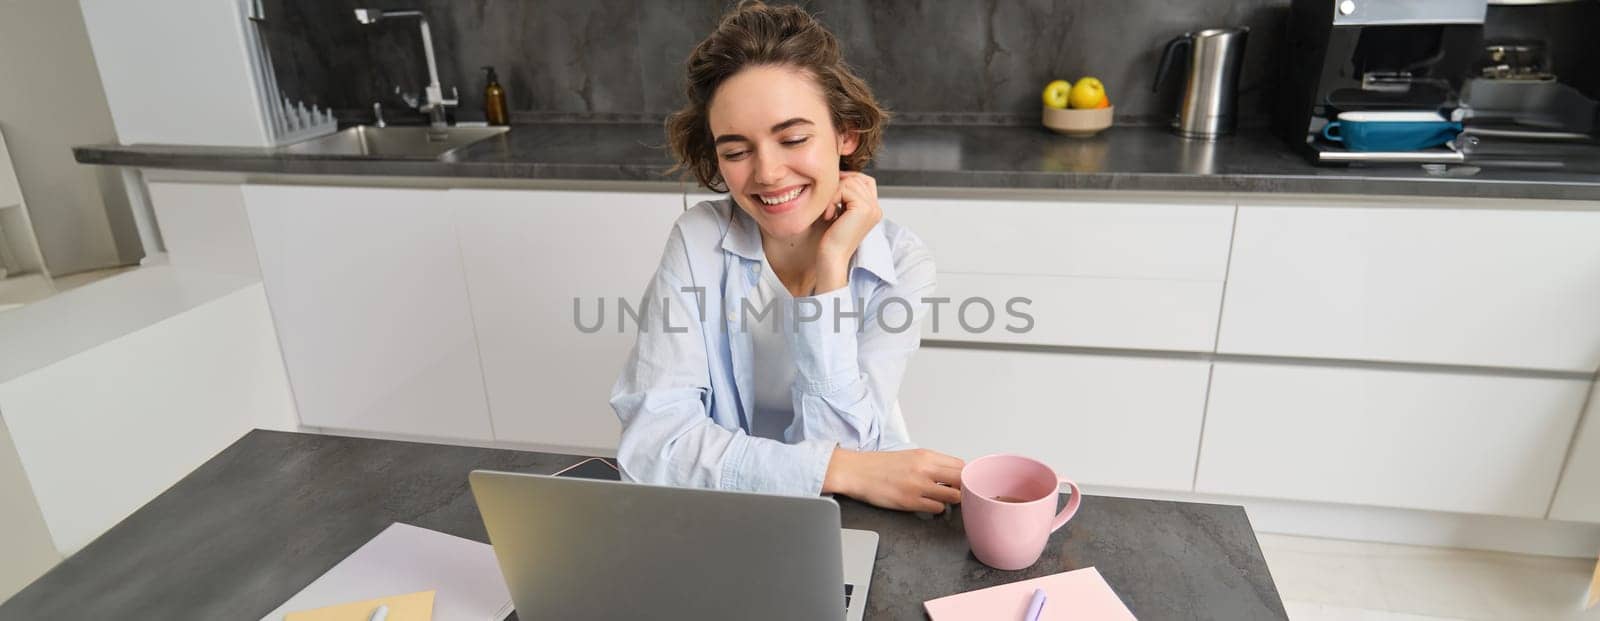 Young woman freelancer works from home, looks at laptop screen and smiles, does homework in kitchen.